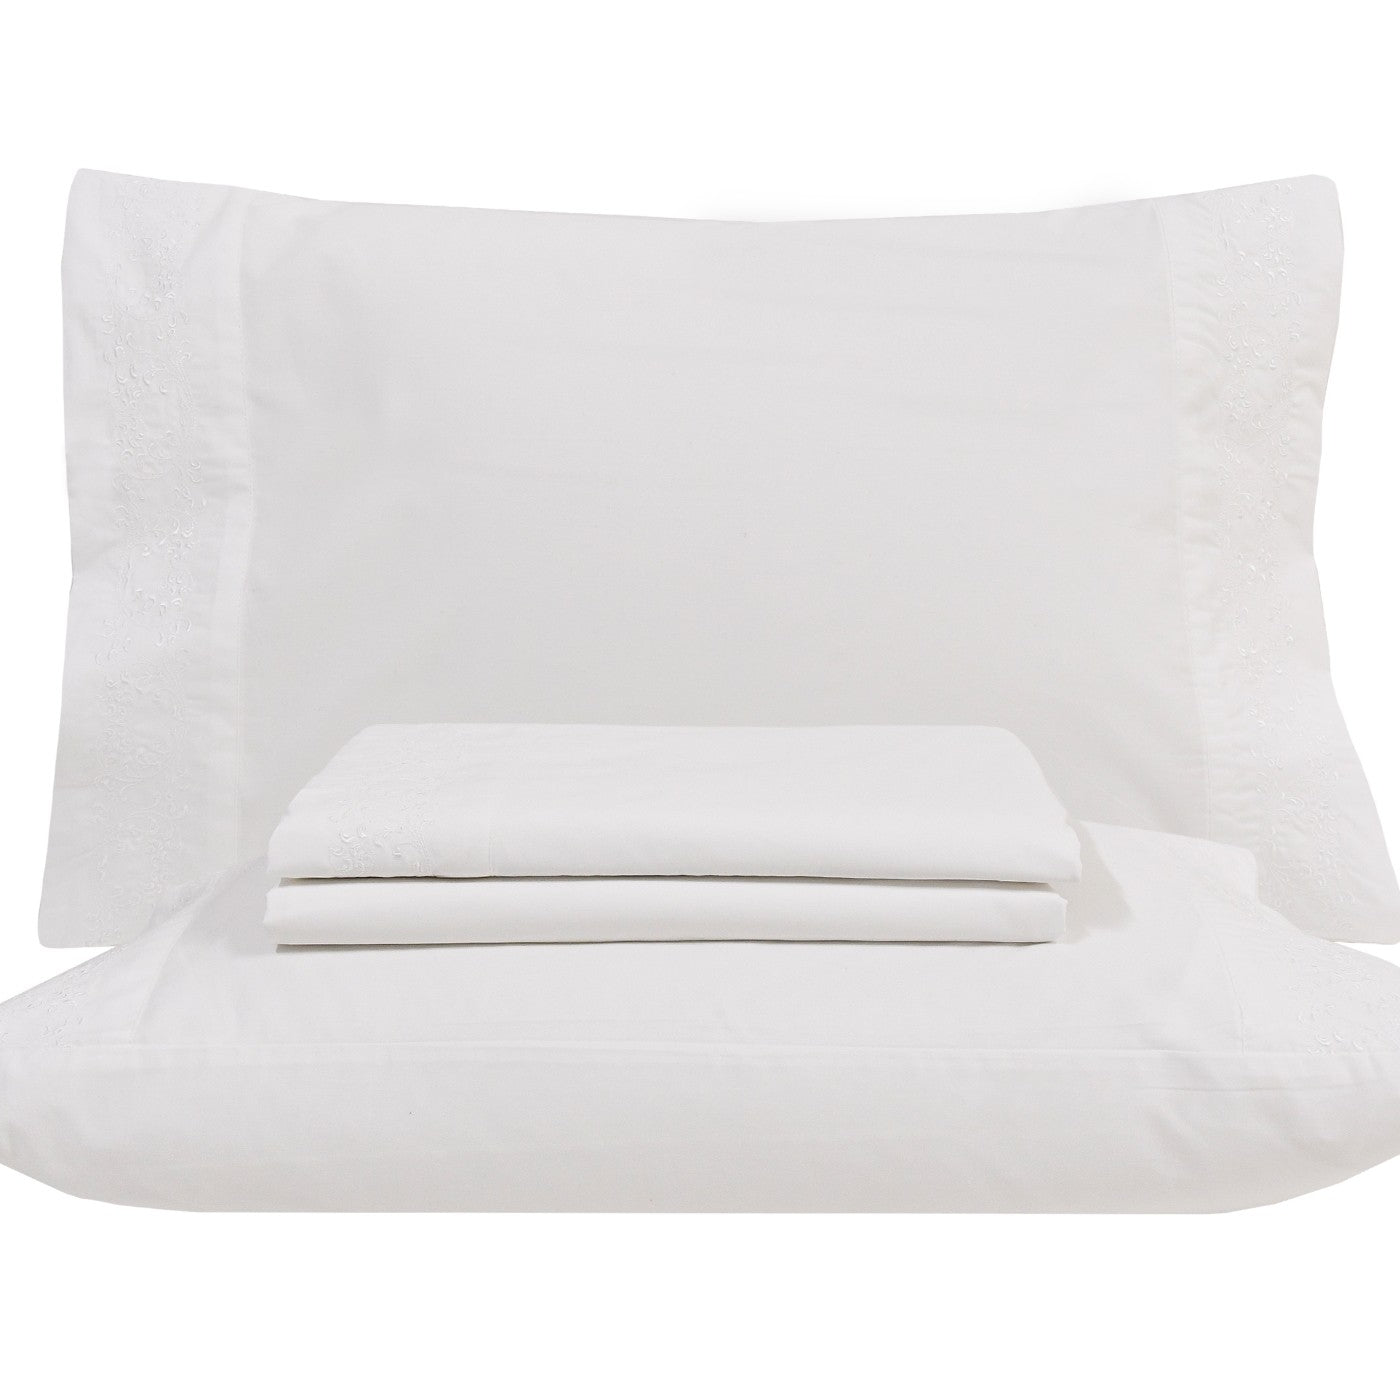 Orion Percale Sheet set